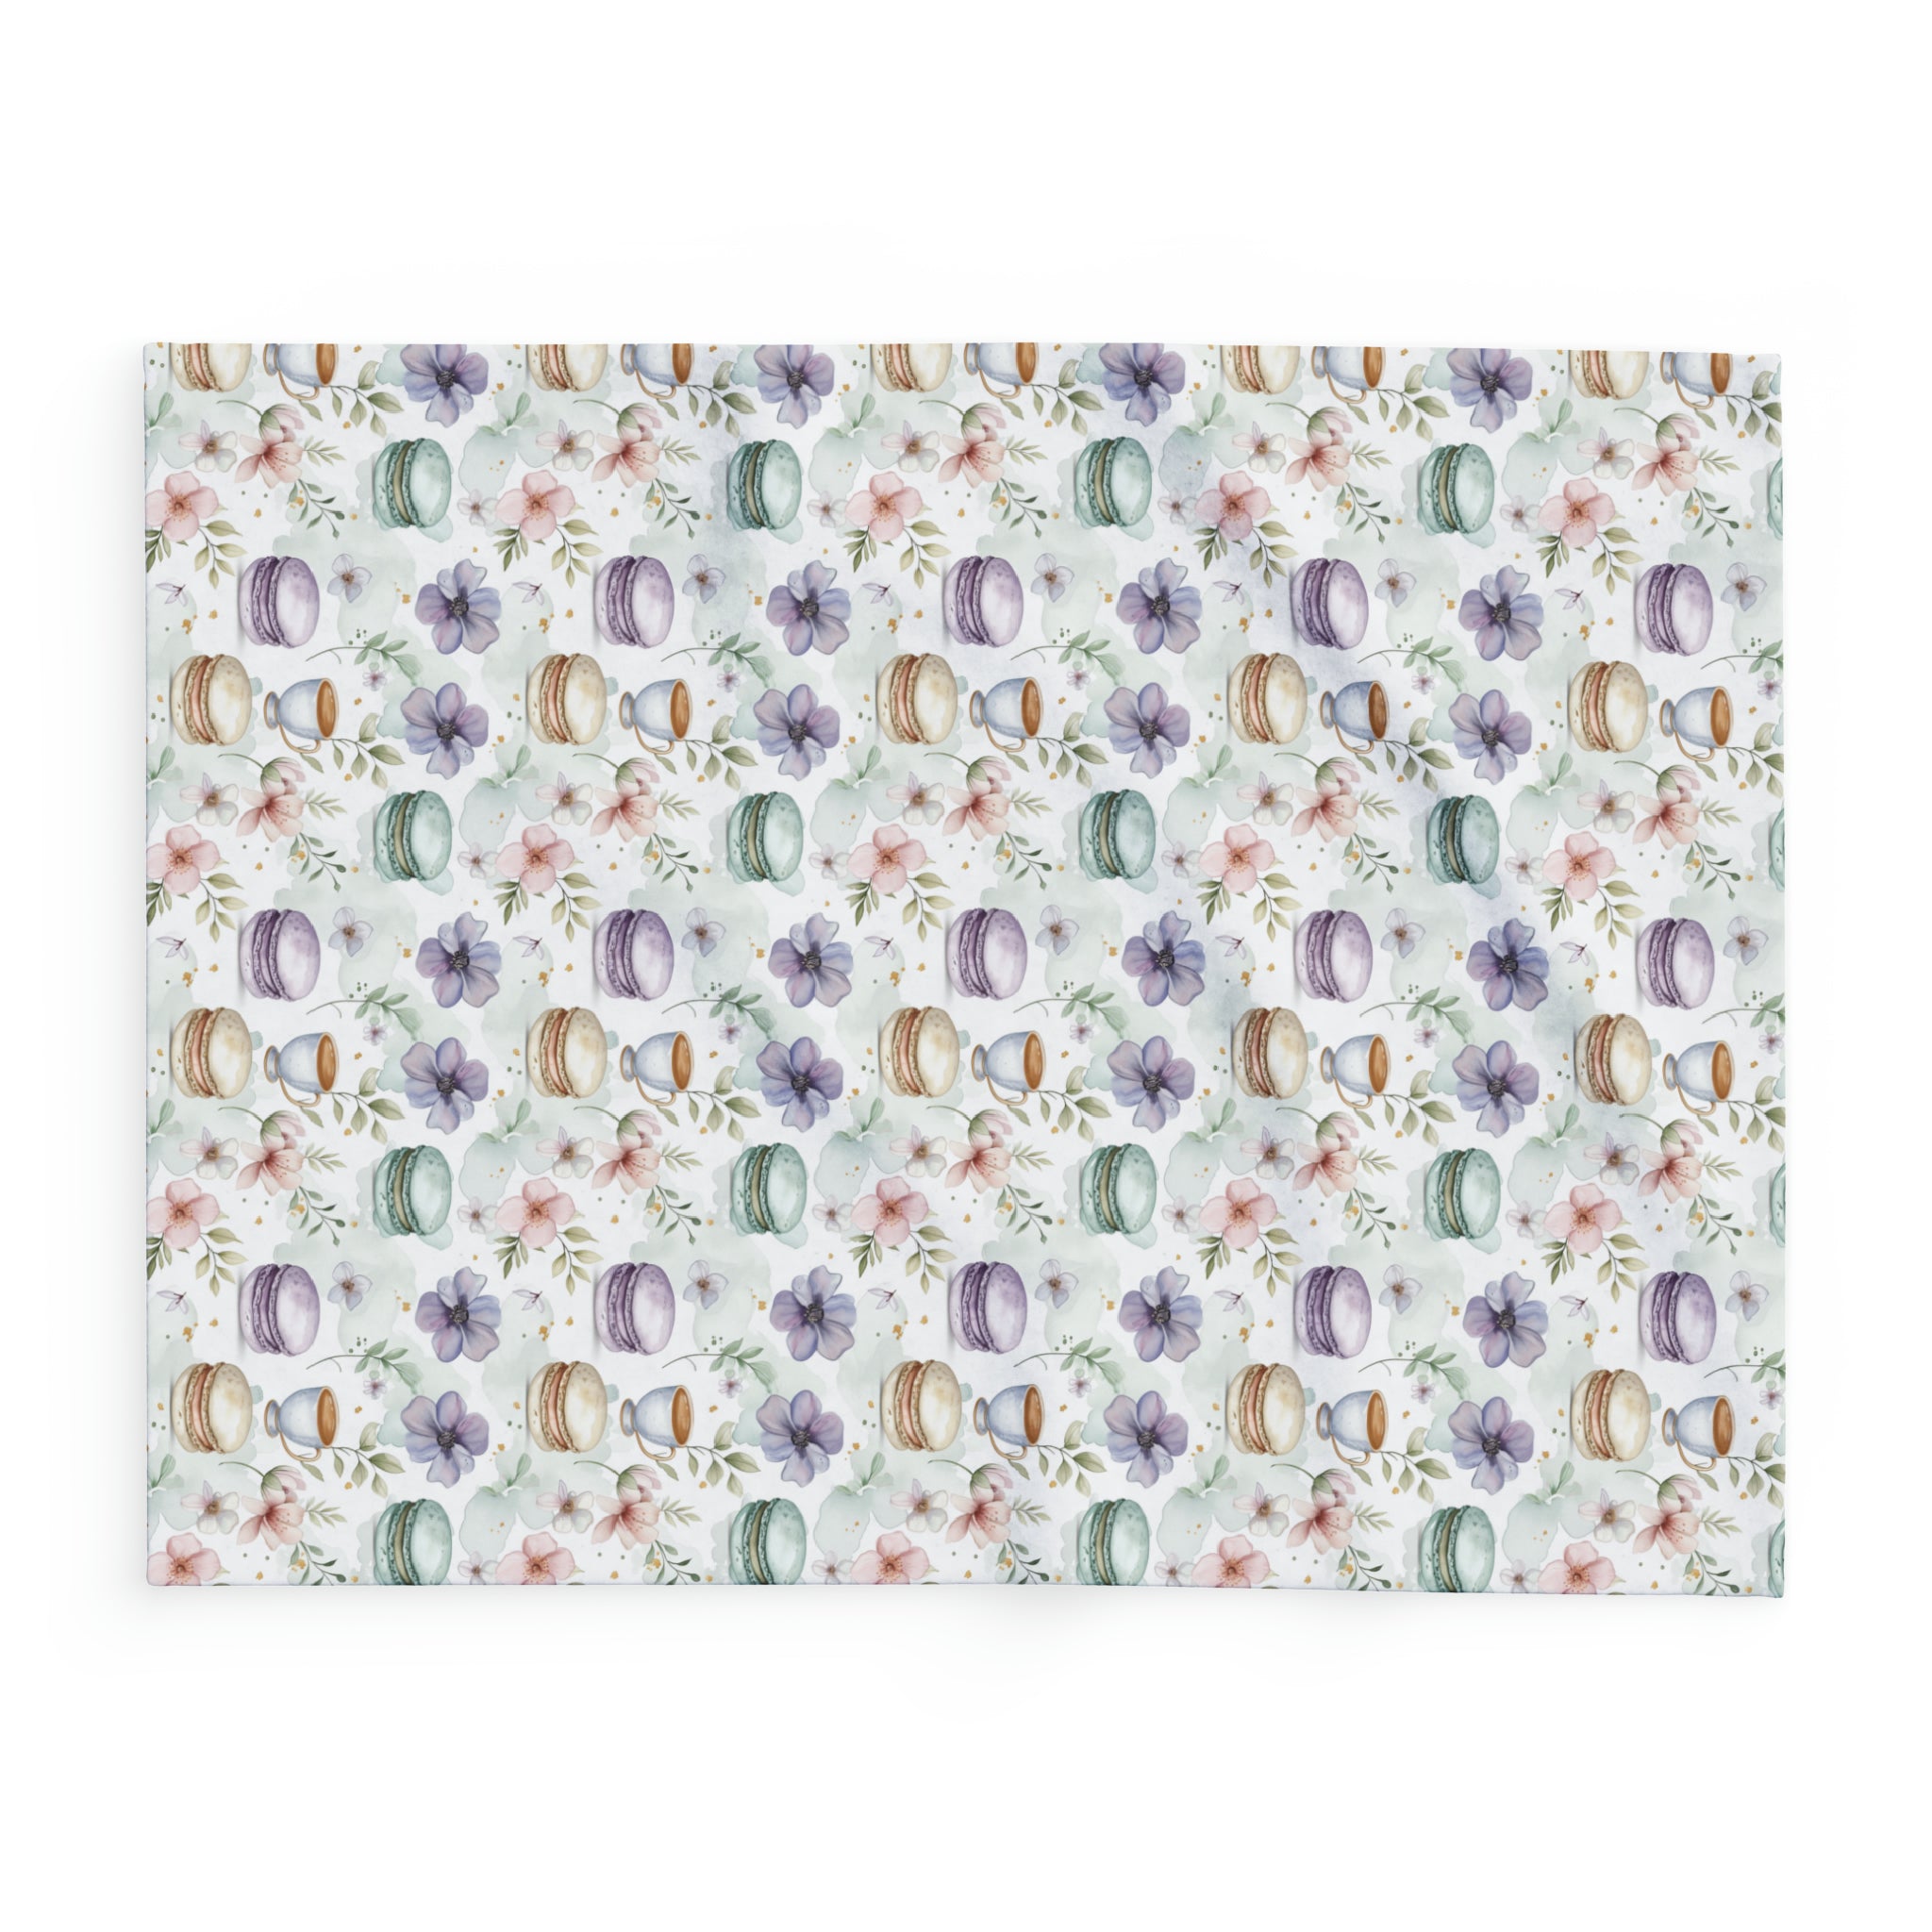 Perfect for Amateur Home Bakers. Cozy Up in Style with our Macaroon Delicious Pattern Arctic Fleece Blanket - Soft and Luxurious Home Decor Accent